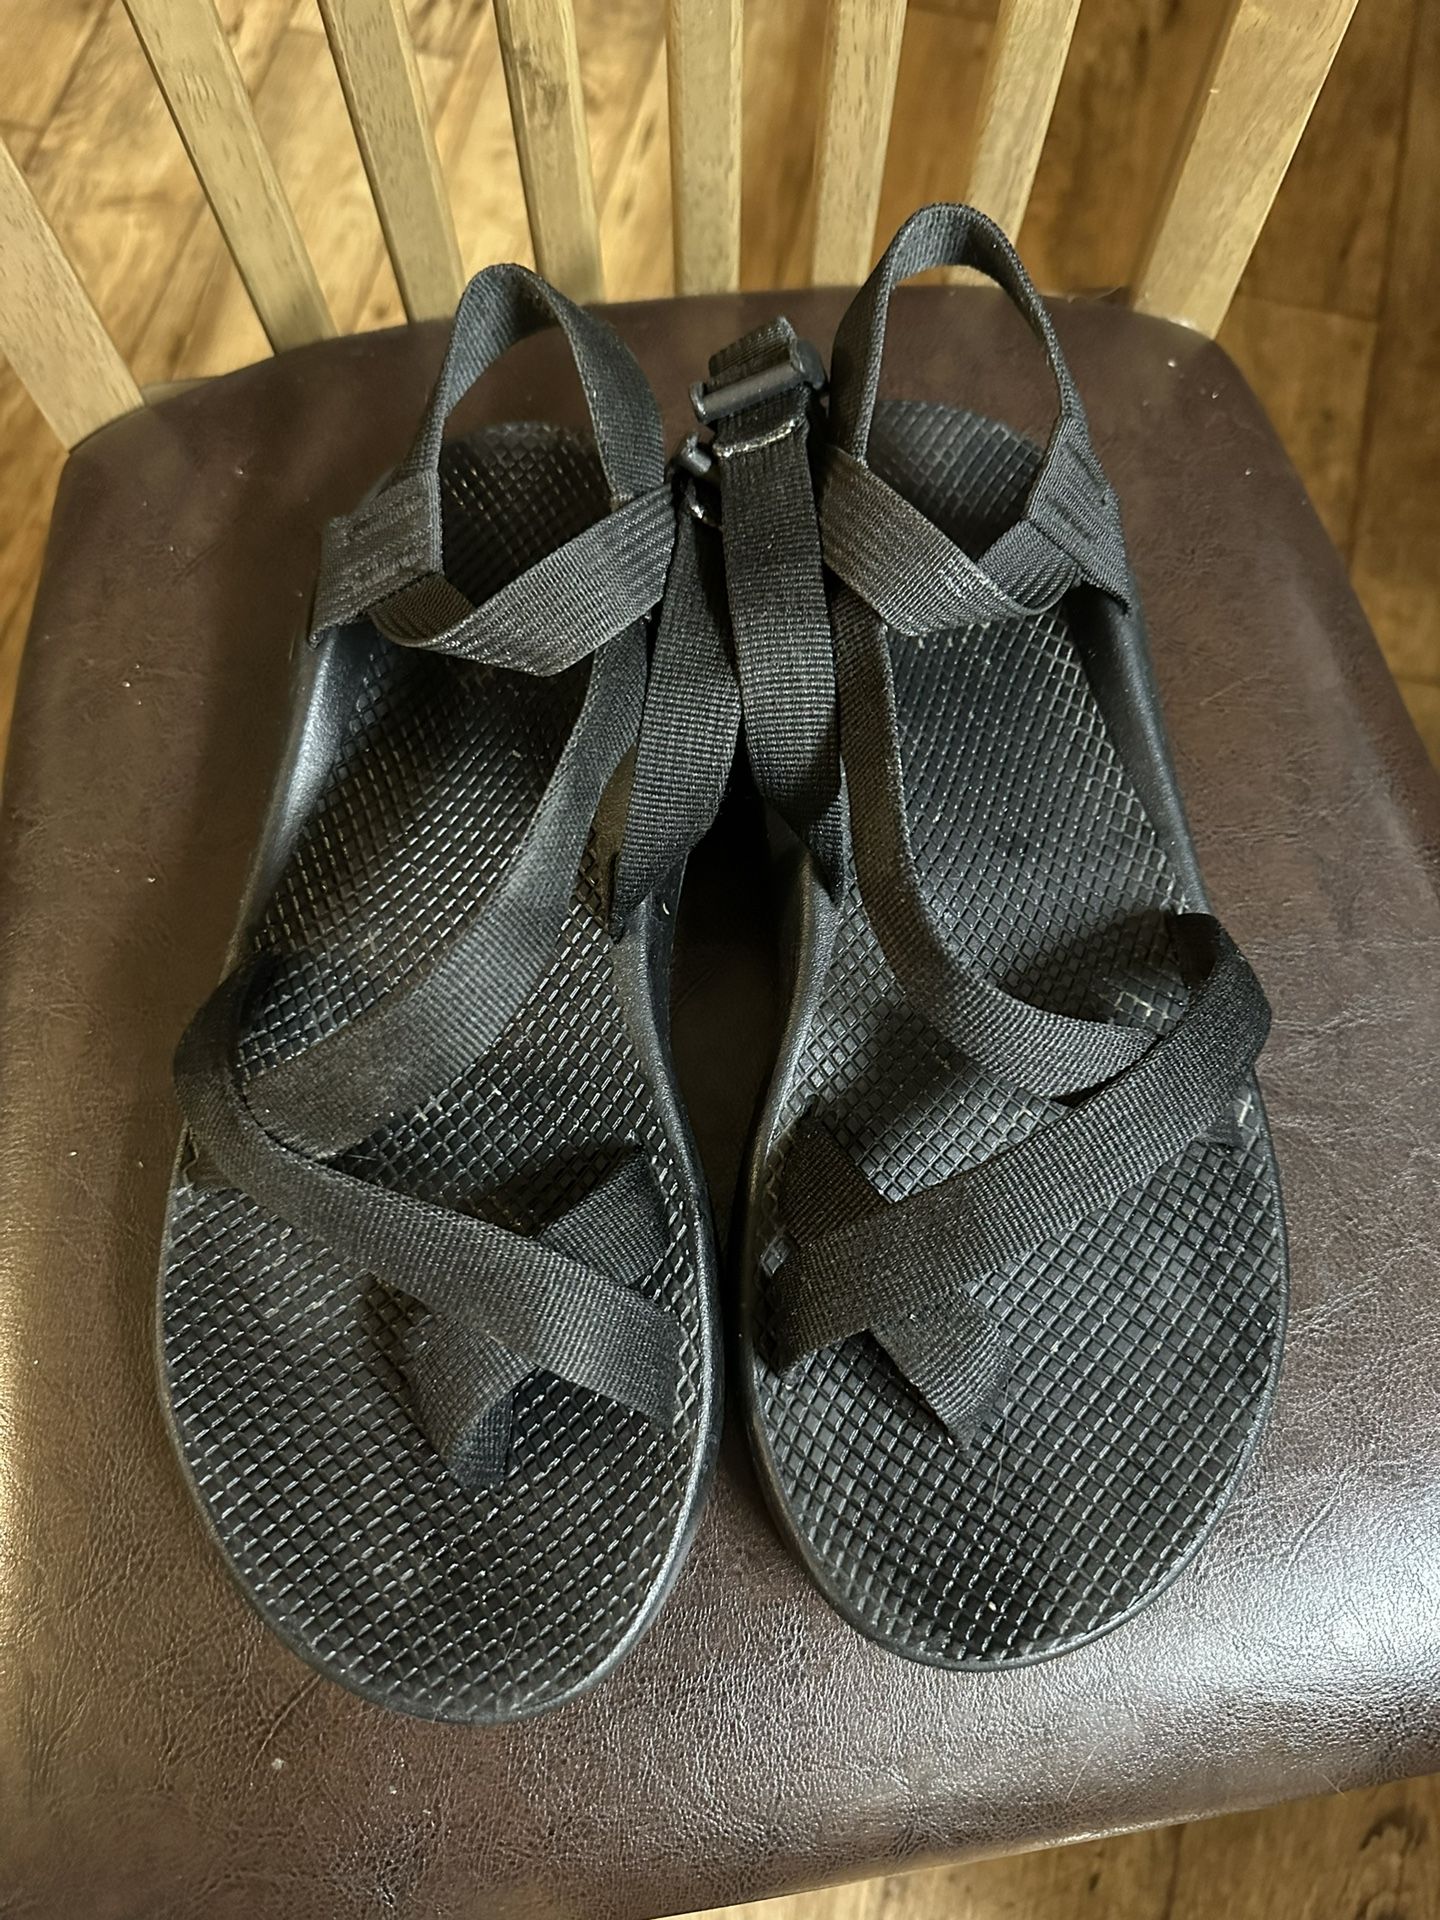 Mens chacos Size 11 Worn 5 Times. 